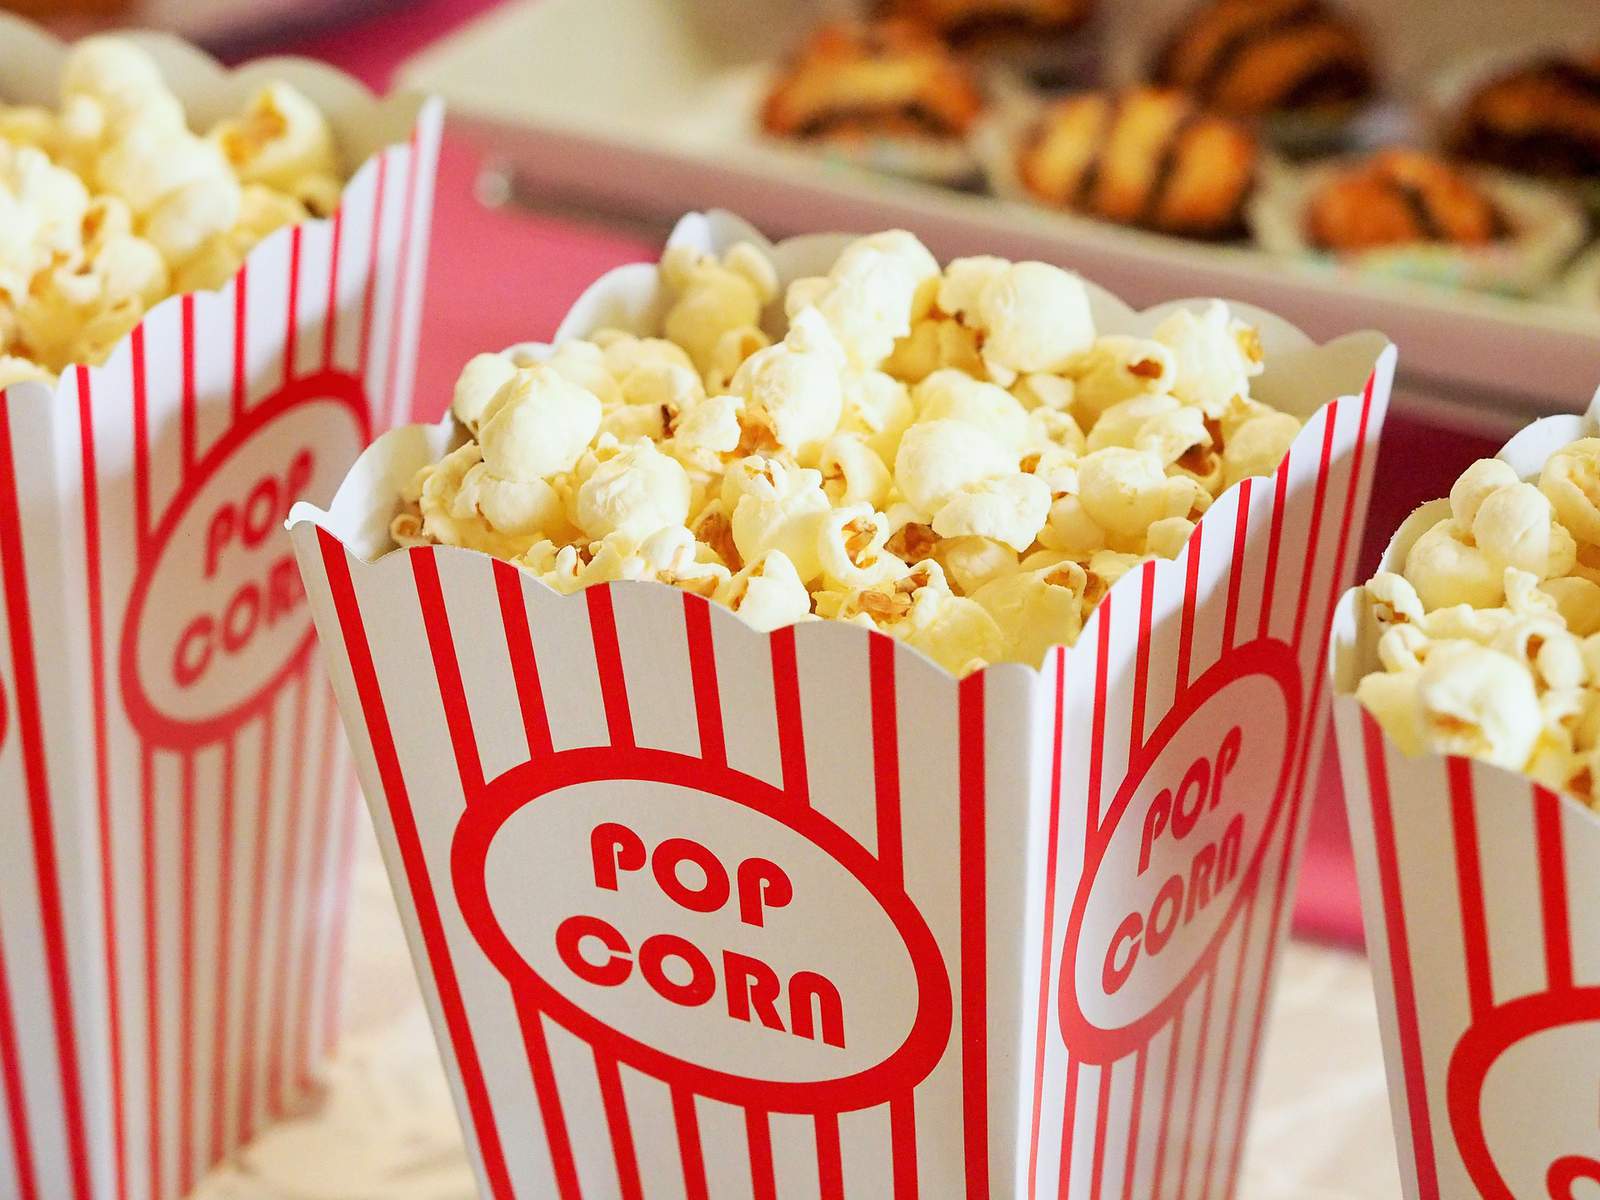 Movie theaters offer discounts, freebies for National Popcorn Day on Tuesday around San Antonio